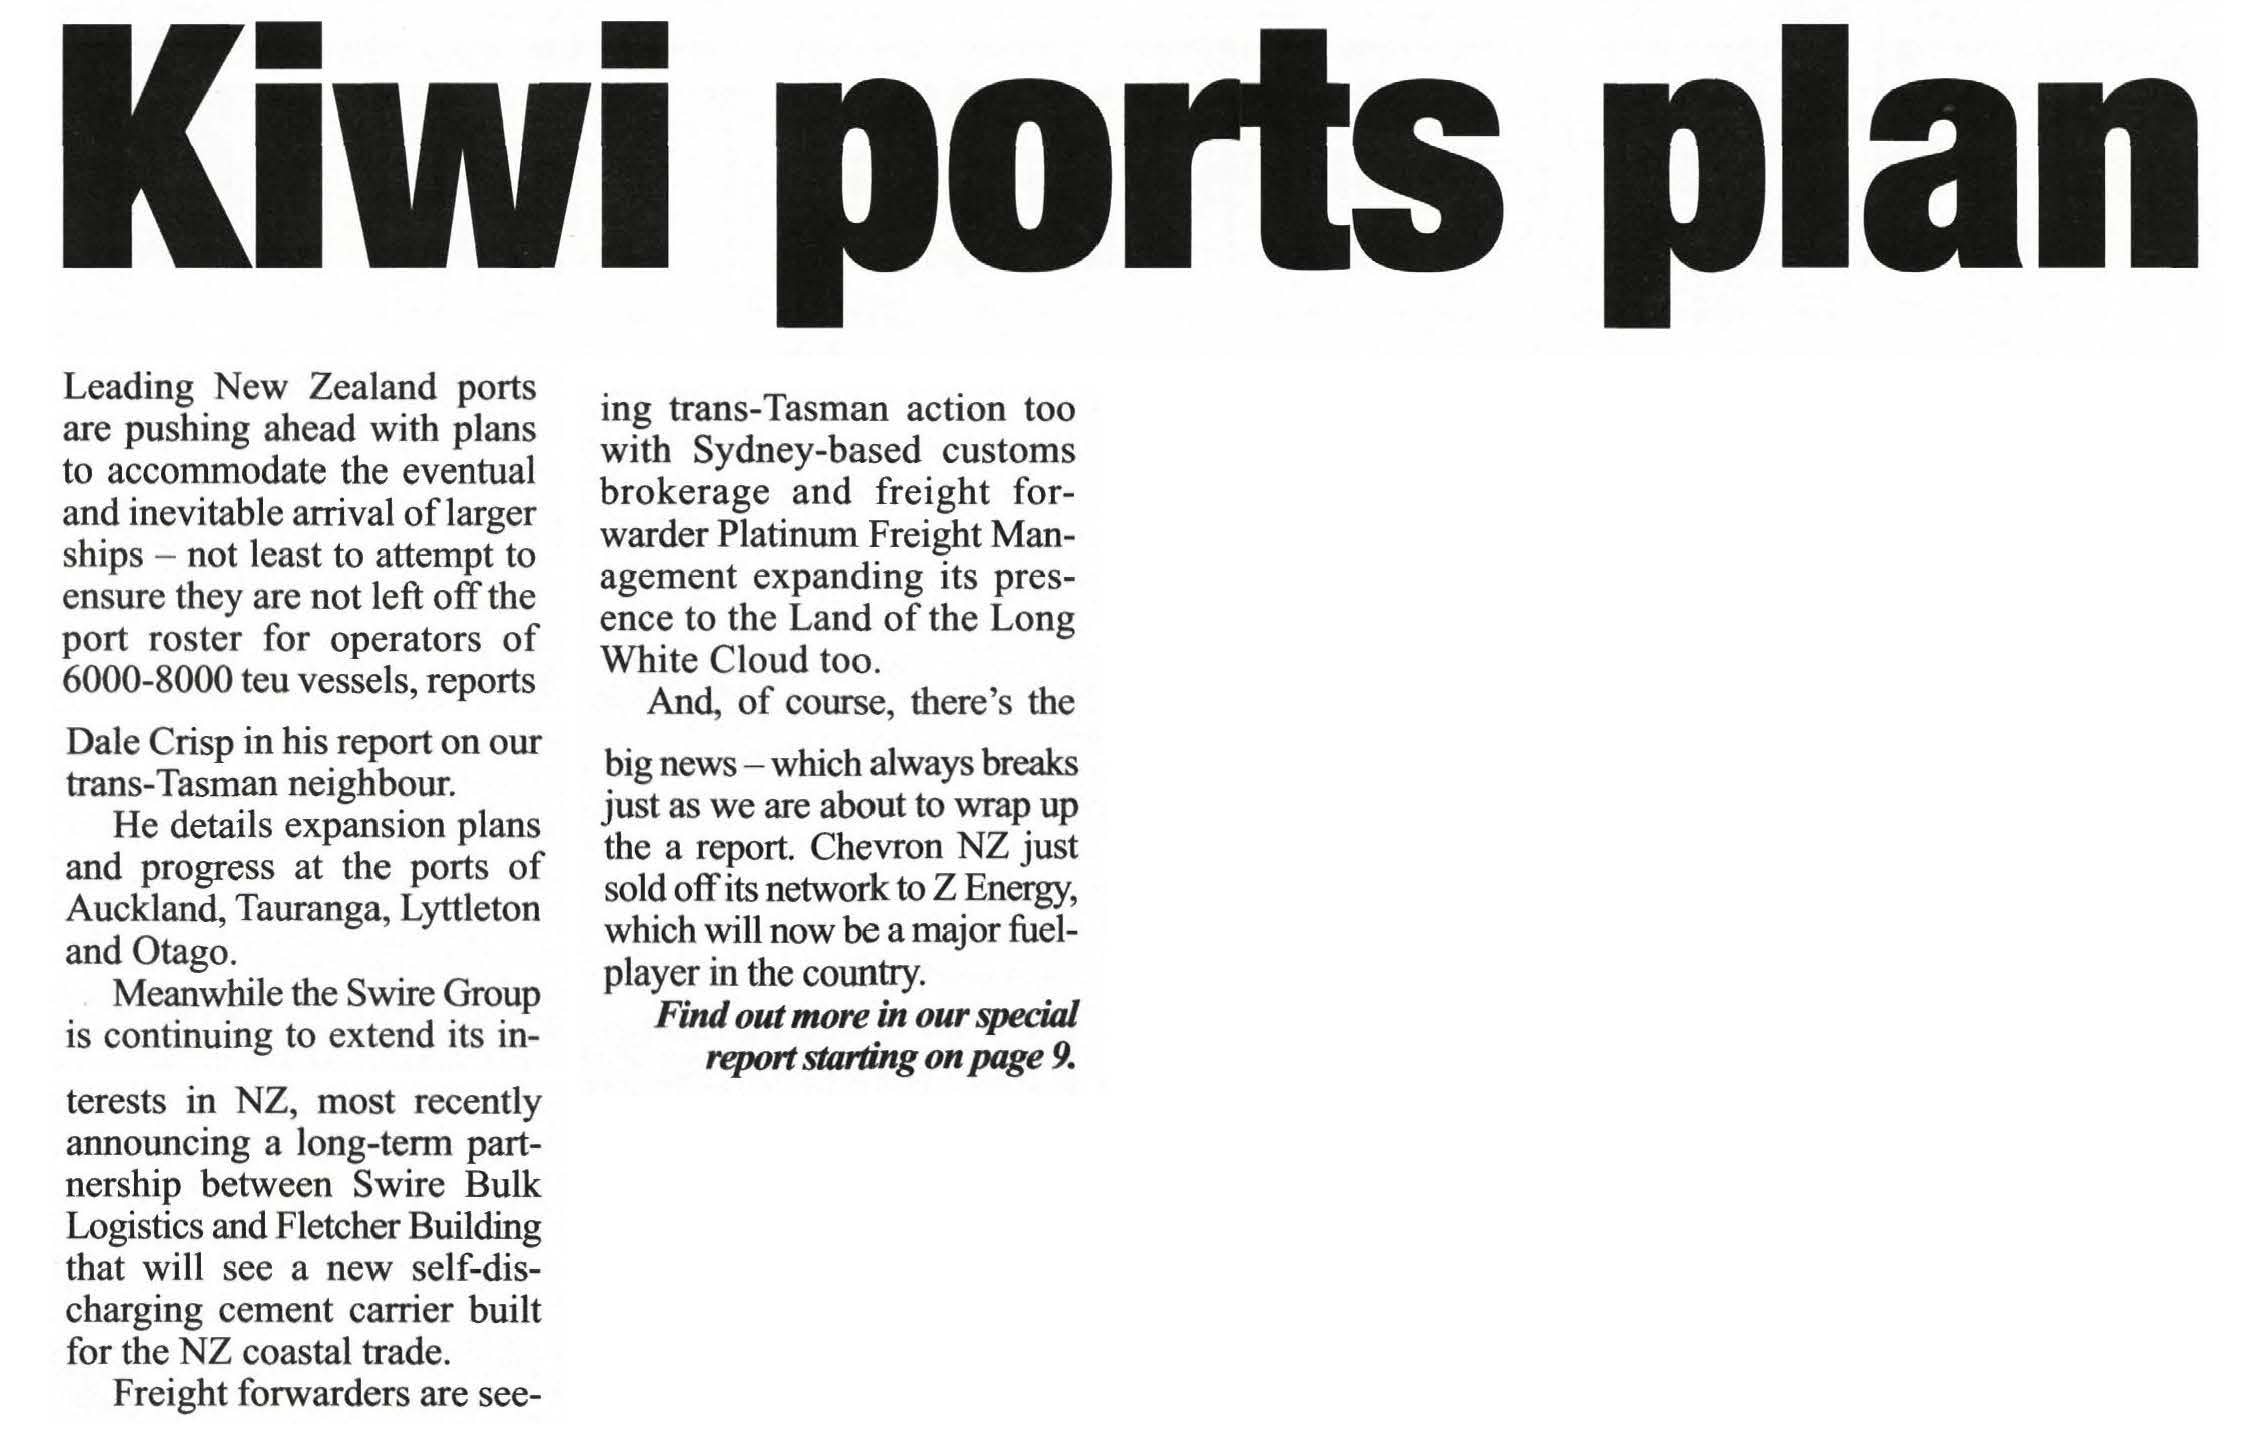 Pages from Lloyd's List - 18 June 2015 - NZ Ports Plan